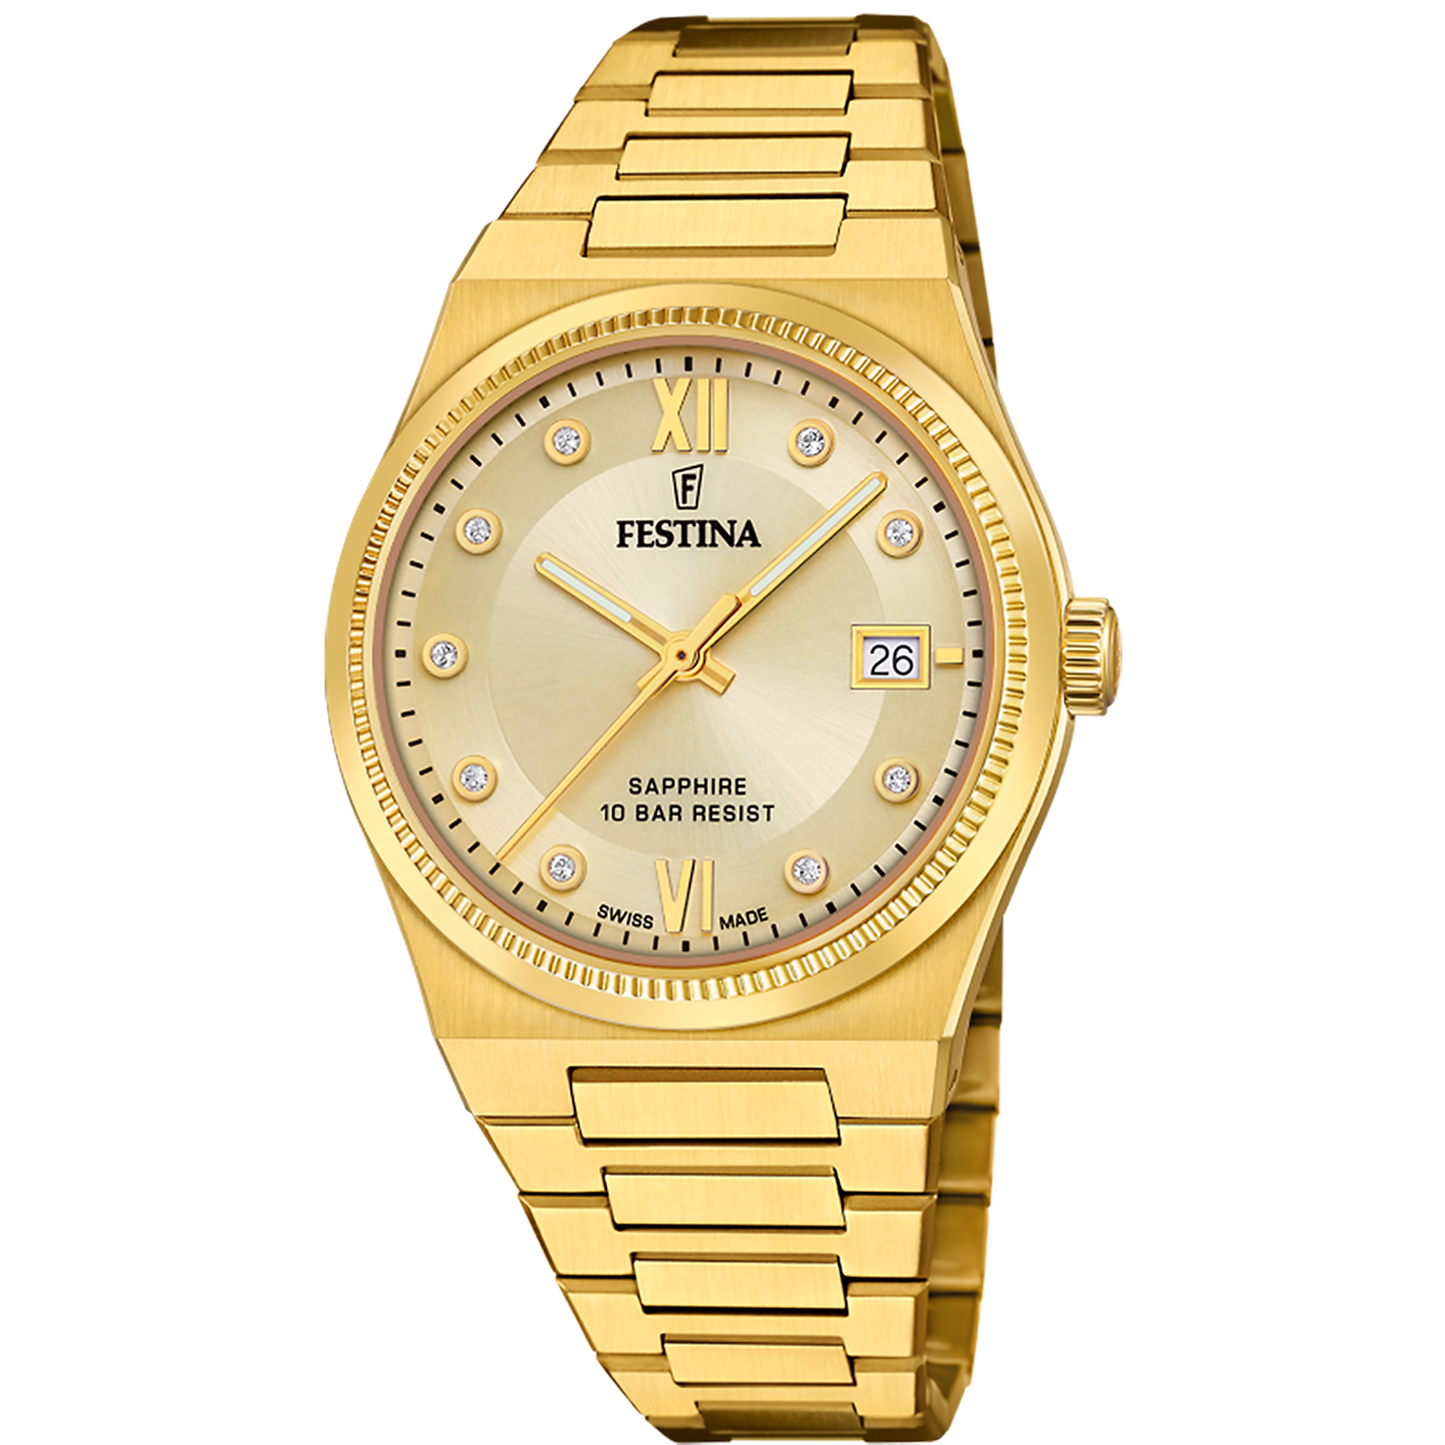 Festina Swiss Made F20039-2 - Analog - Strap Material Stainless Steel I Festina Watches USA